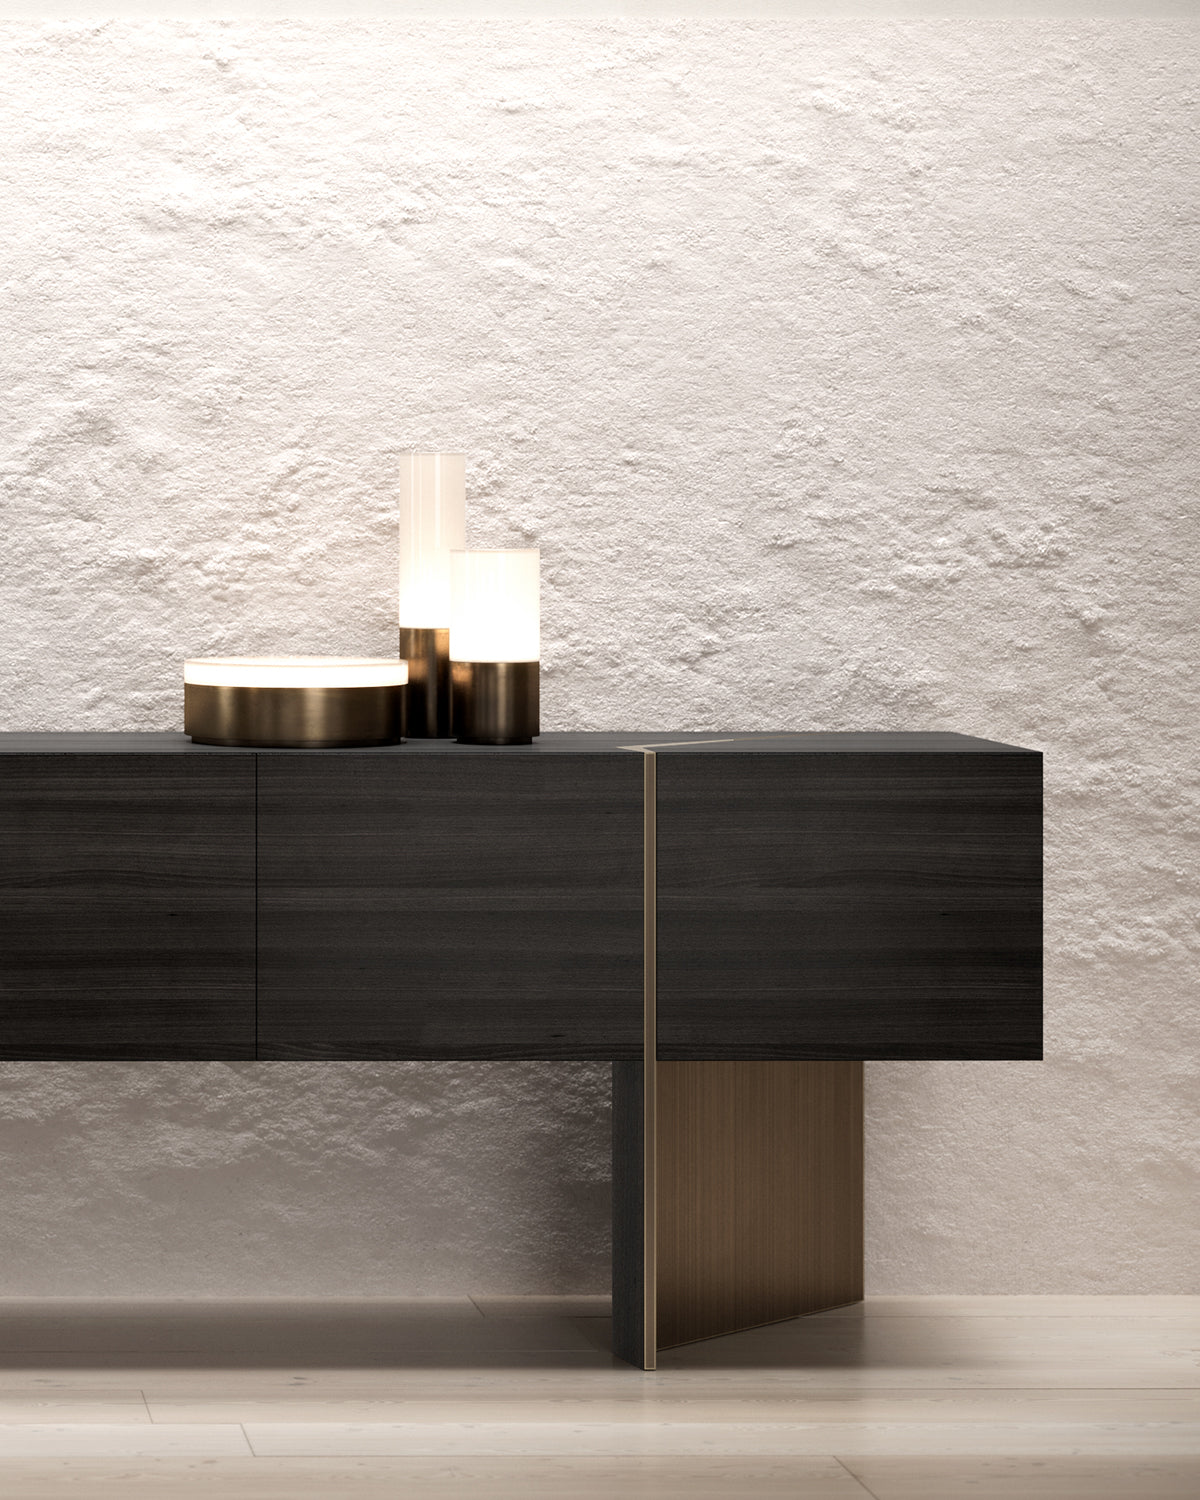 EMMEMOBILI CYLENCE Table Lamps - $4,708-$5,896